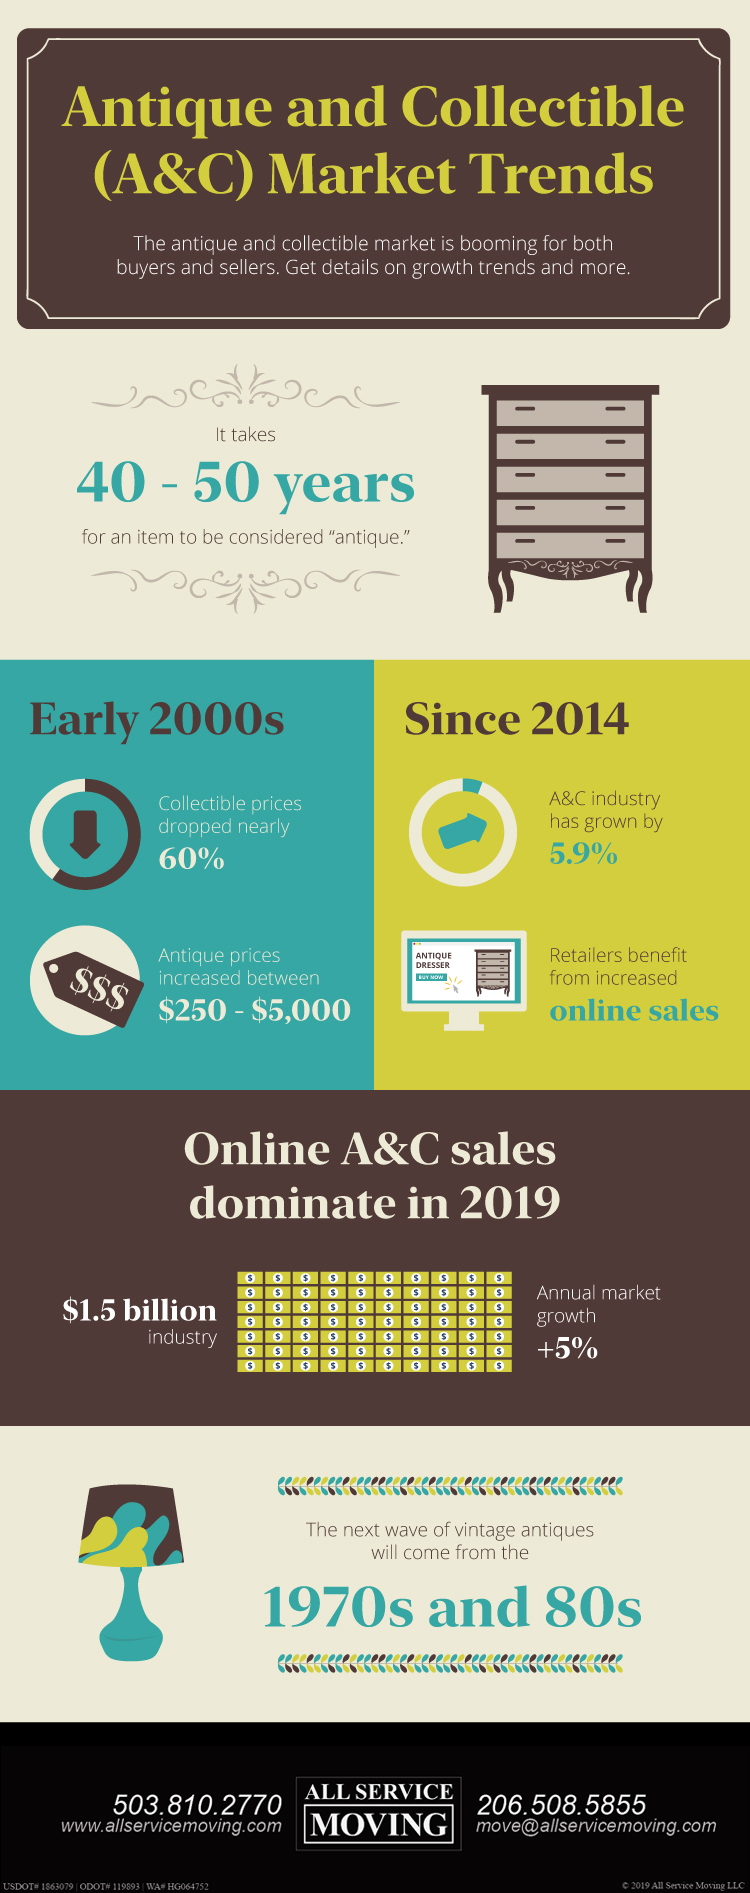 Antique-and-Collectible-Market-Trends-Infographic